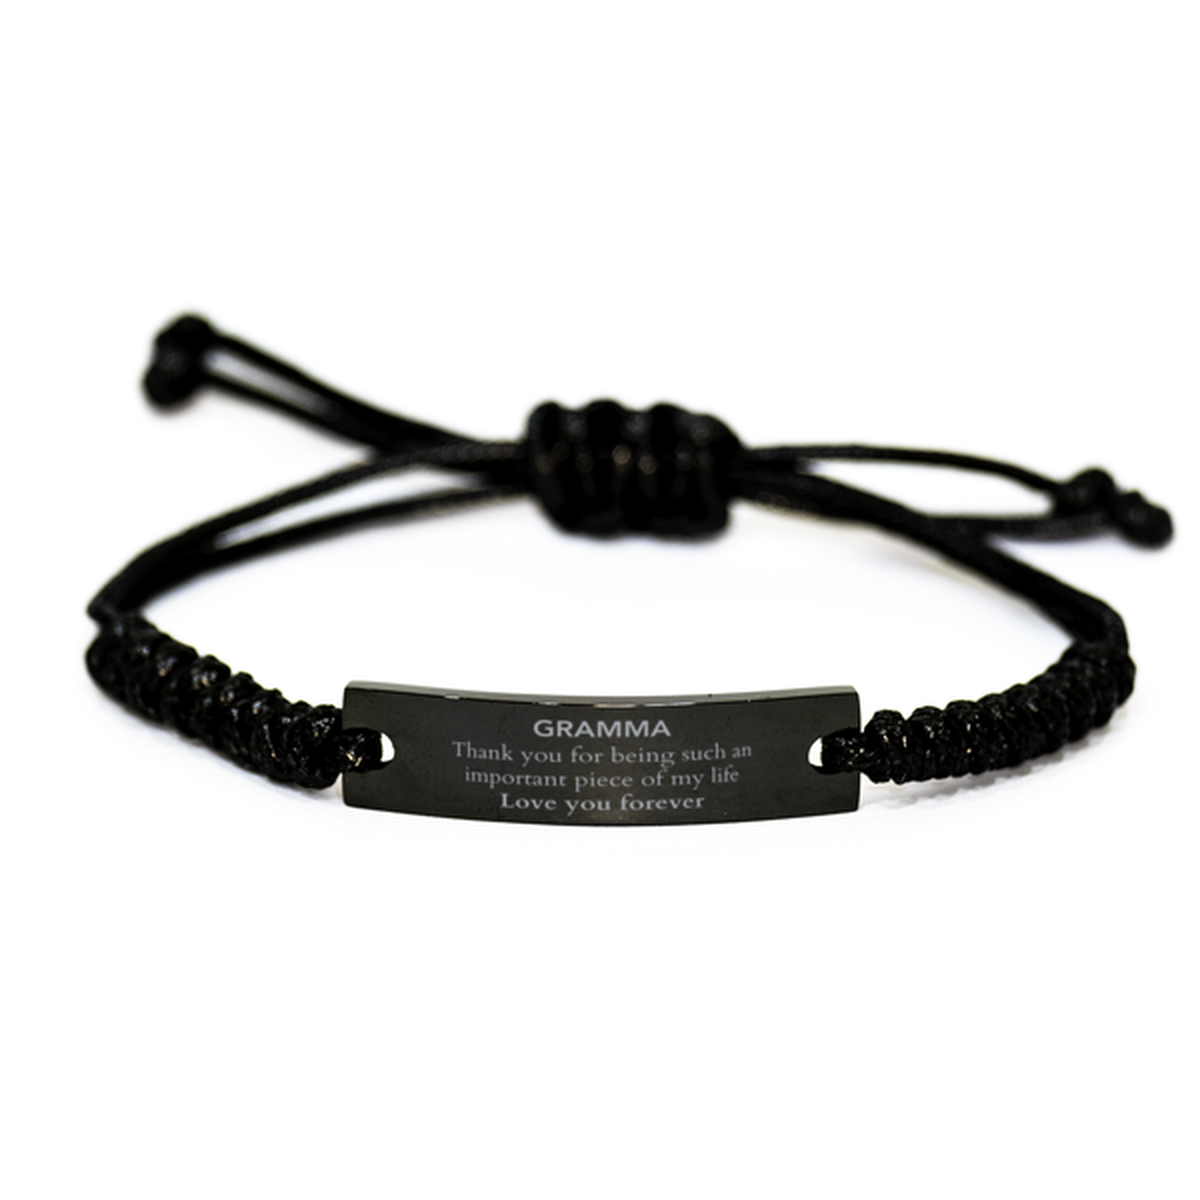 Appropriate Gramma Black Rope Bracelet Epic Birthday Gifts for Gramma Thank you for being such an important piece of my life Gramma Christmas Mothers Fathers Day